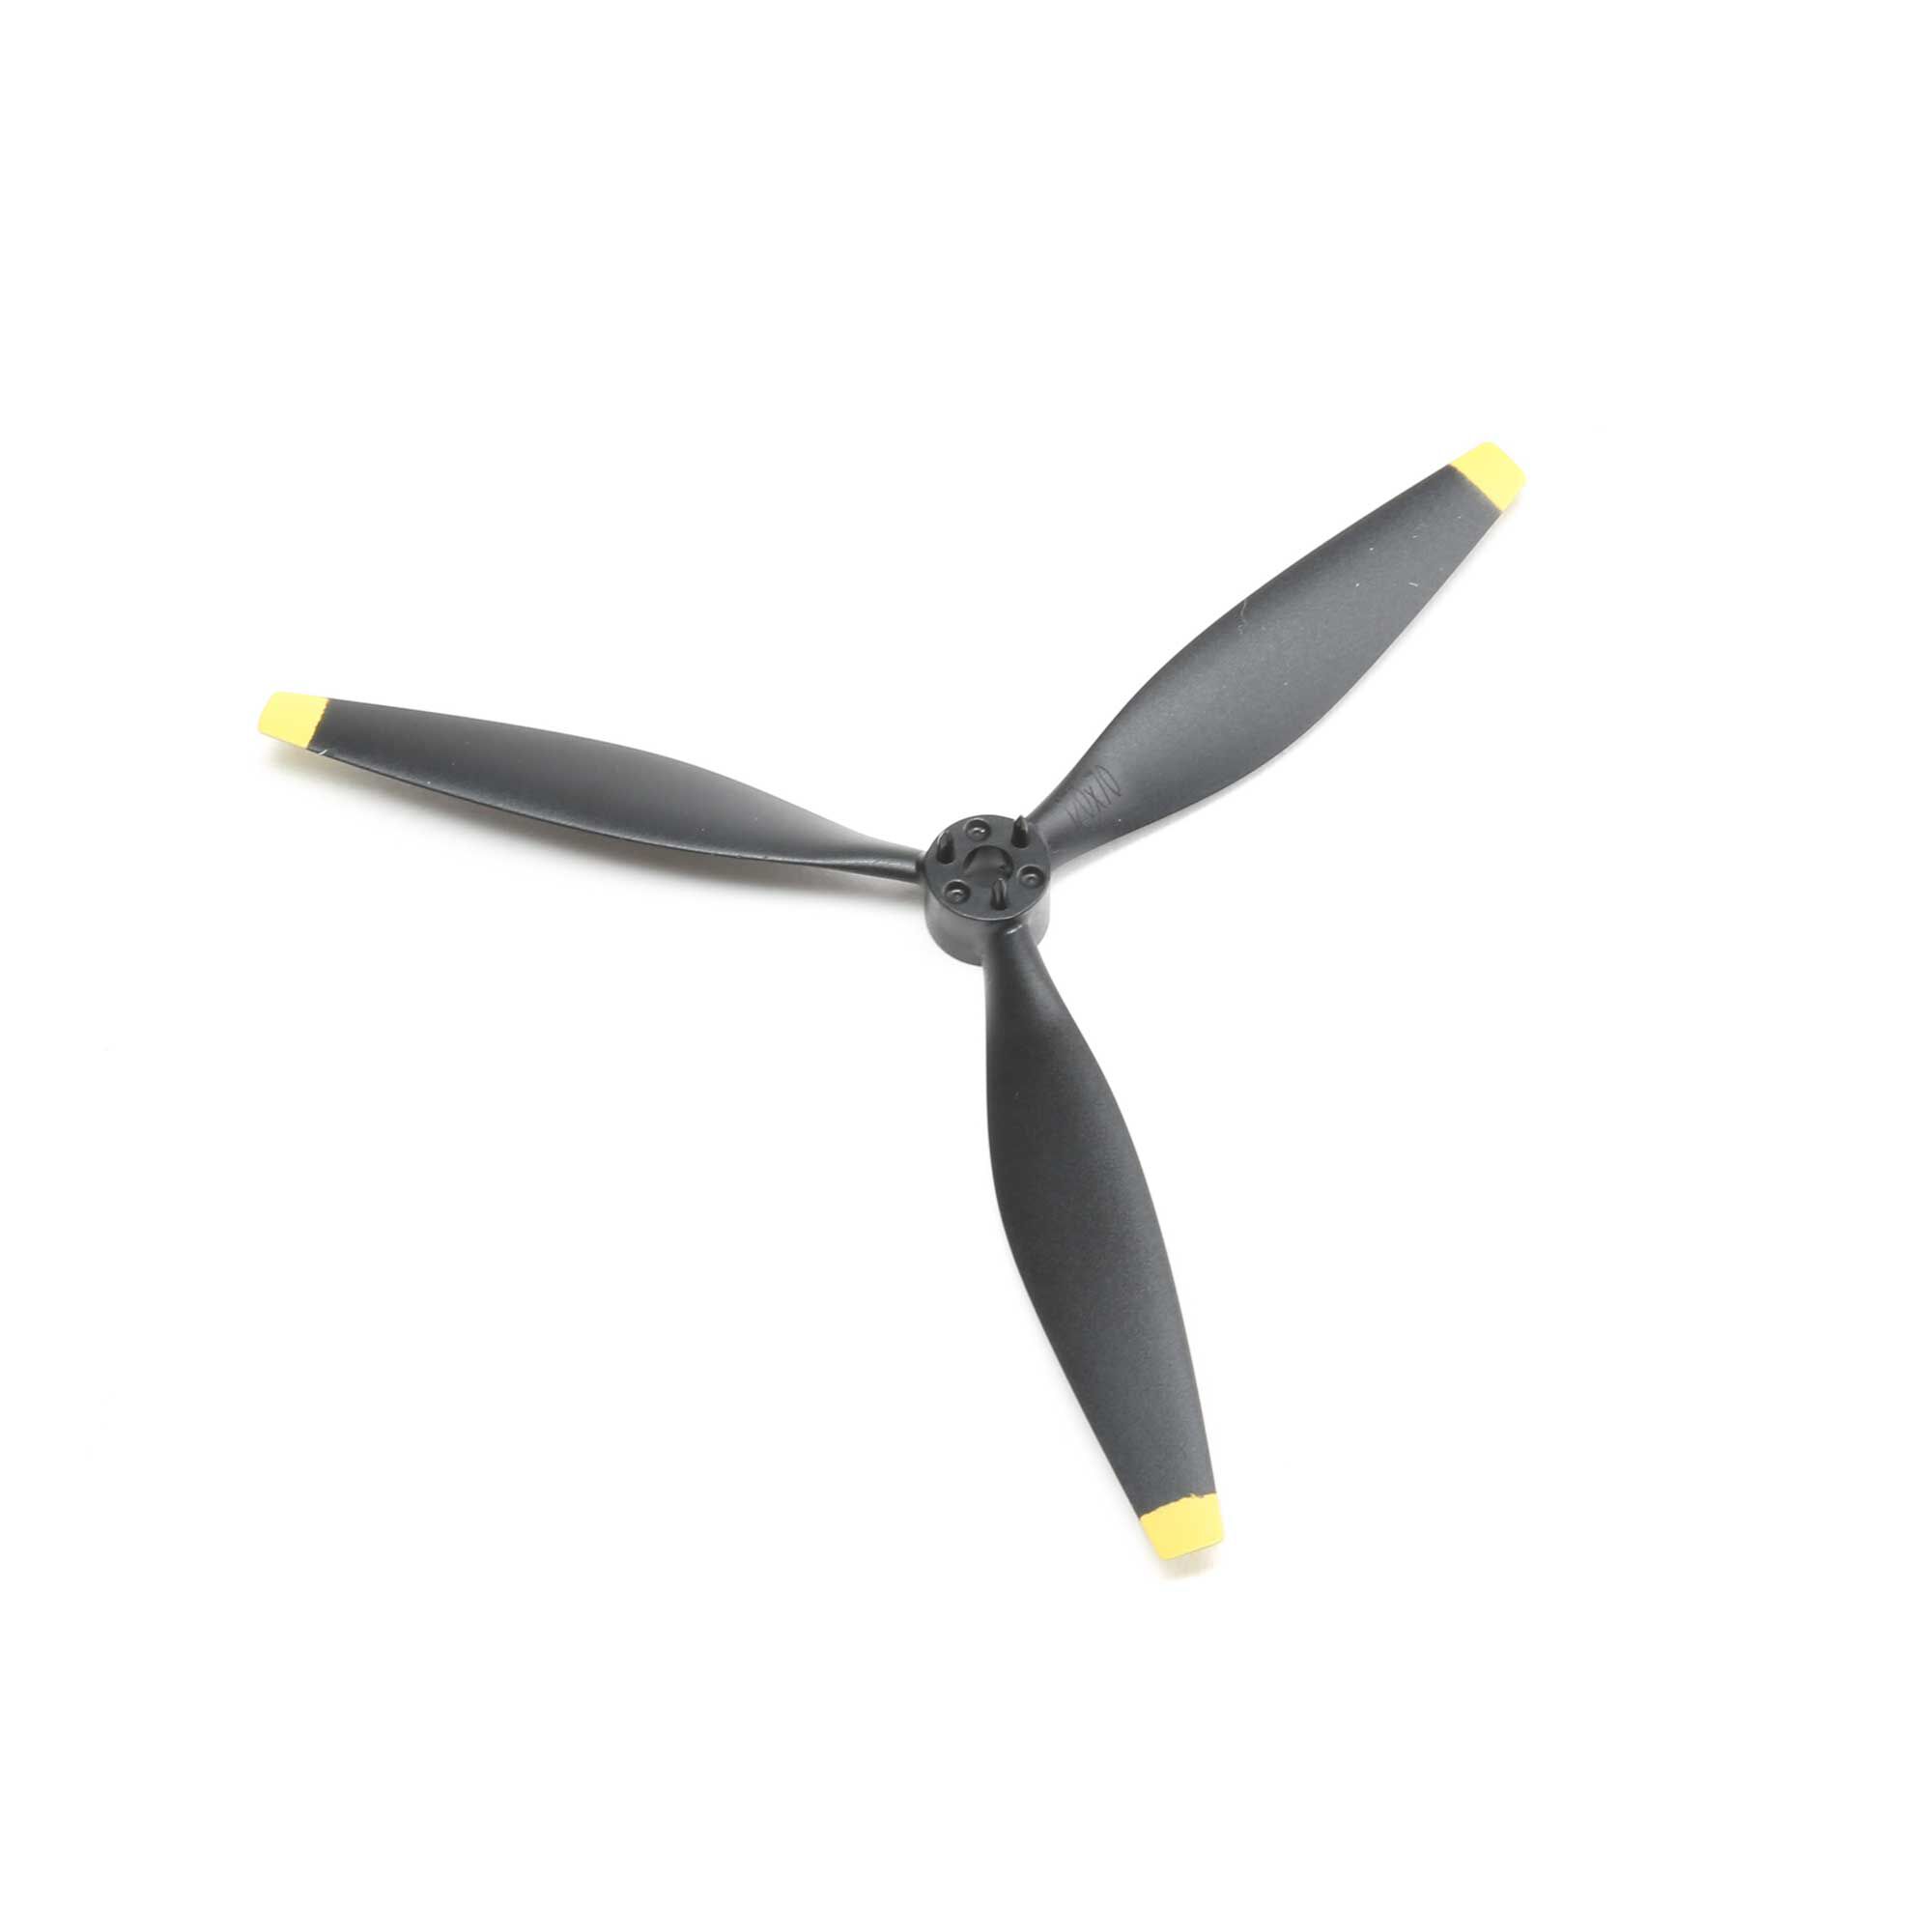 10pcs/lot Propellers 11x10E 2 Leaf Blade for RC Airplane DIY Accessory Gray 